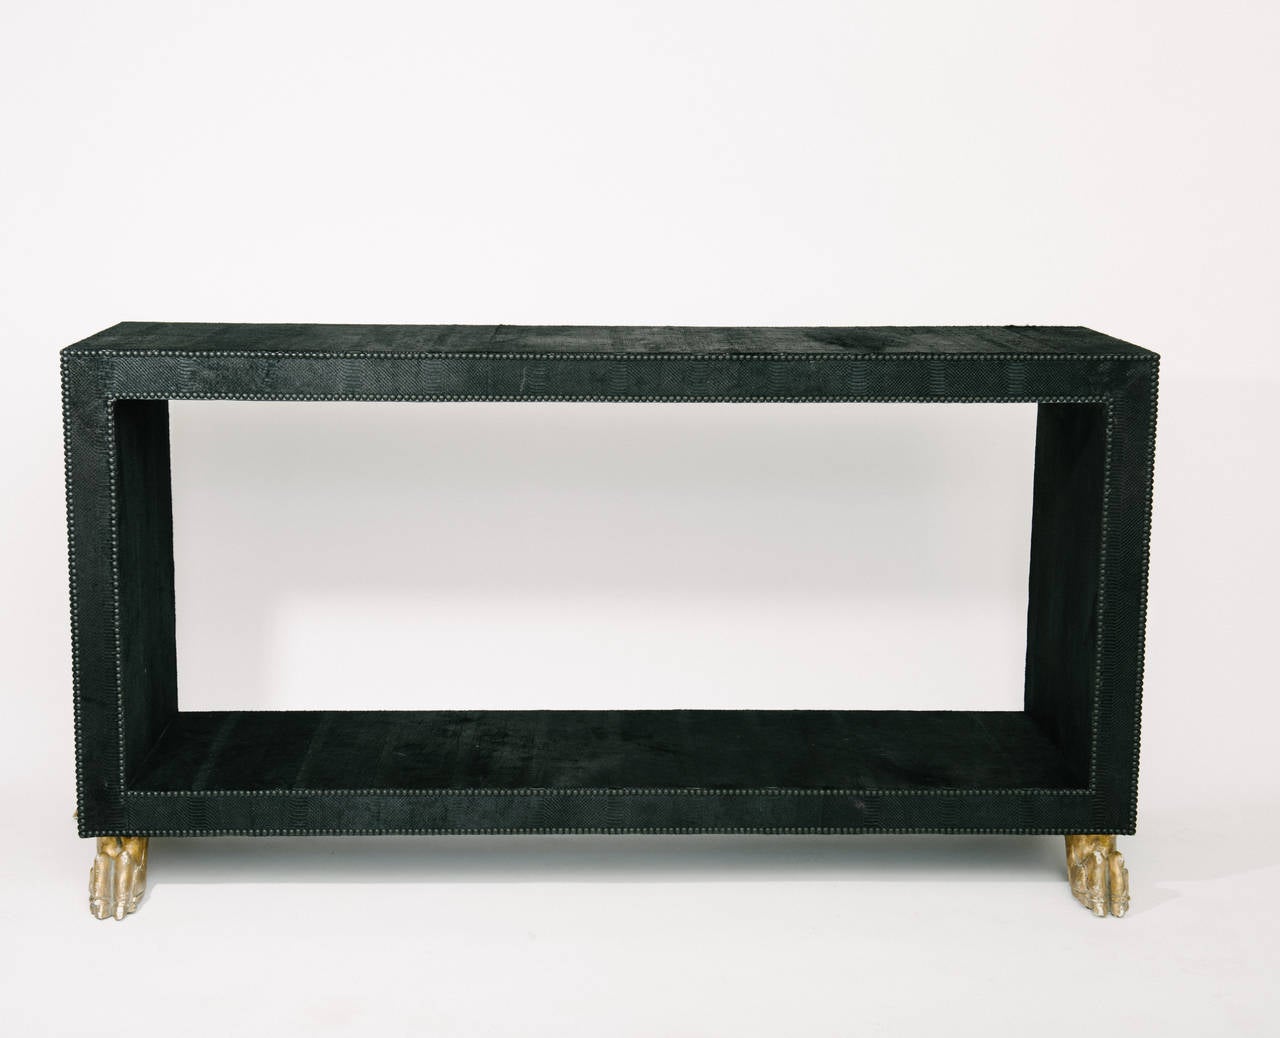 An avant-garde custom Parsons console wrapped in a jet black Italian laser etched snakeskin hair hide with matte black nailhead detailing. This unique Silhouette sits atop four carved giltwood lion's feet in the manner of Jean-Charles Moreux. Also